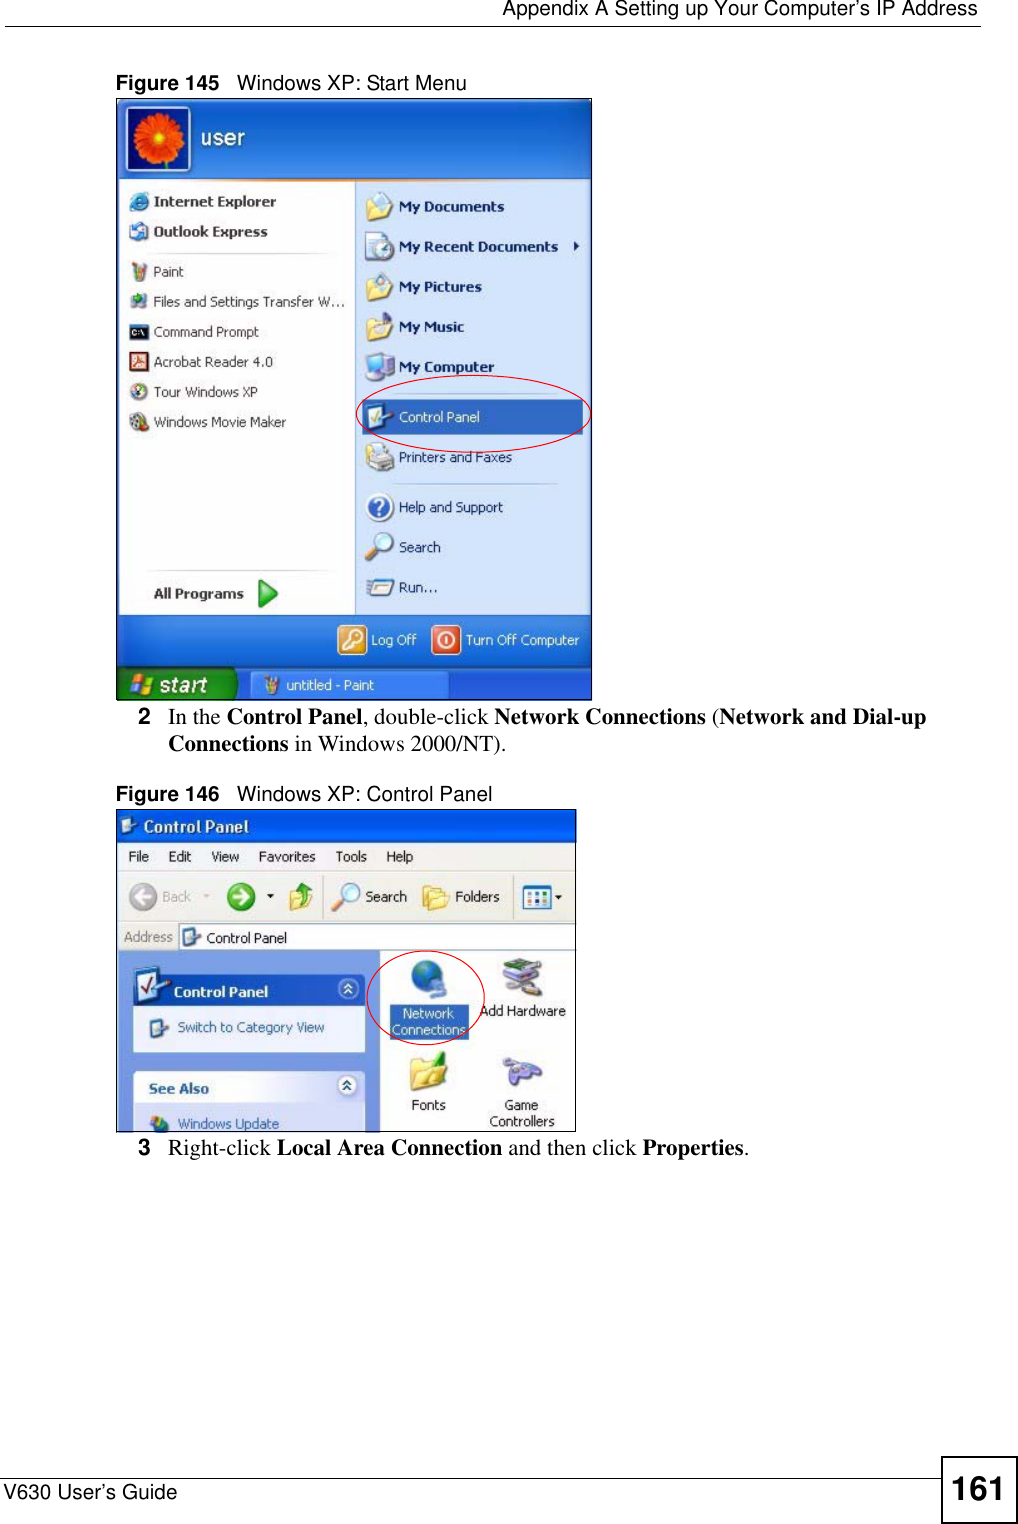  Appendix A Setting up Your Computer’s IP AddressV630 User’s Guide 161Figure 145   Windows XP: Start Menu2In the Control Panel, double-click Network Connections (Network and Dial-up Connections in Windows 2000/NT).Figure 146   Windows XP: Control Panel3Right-click Local Area Connection and then click Properties.